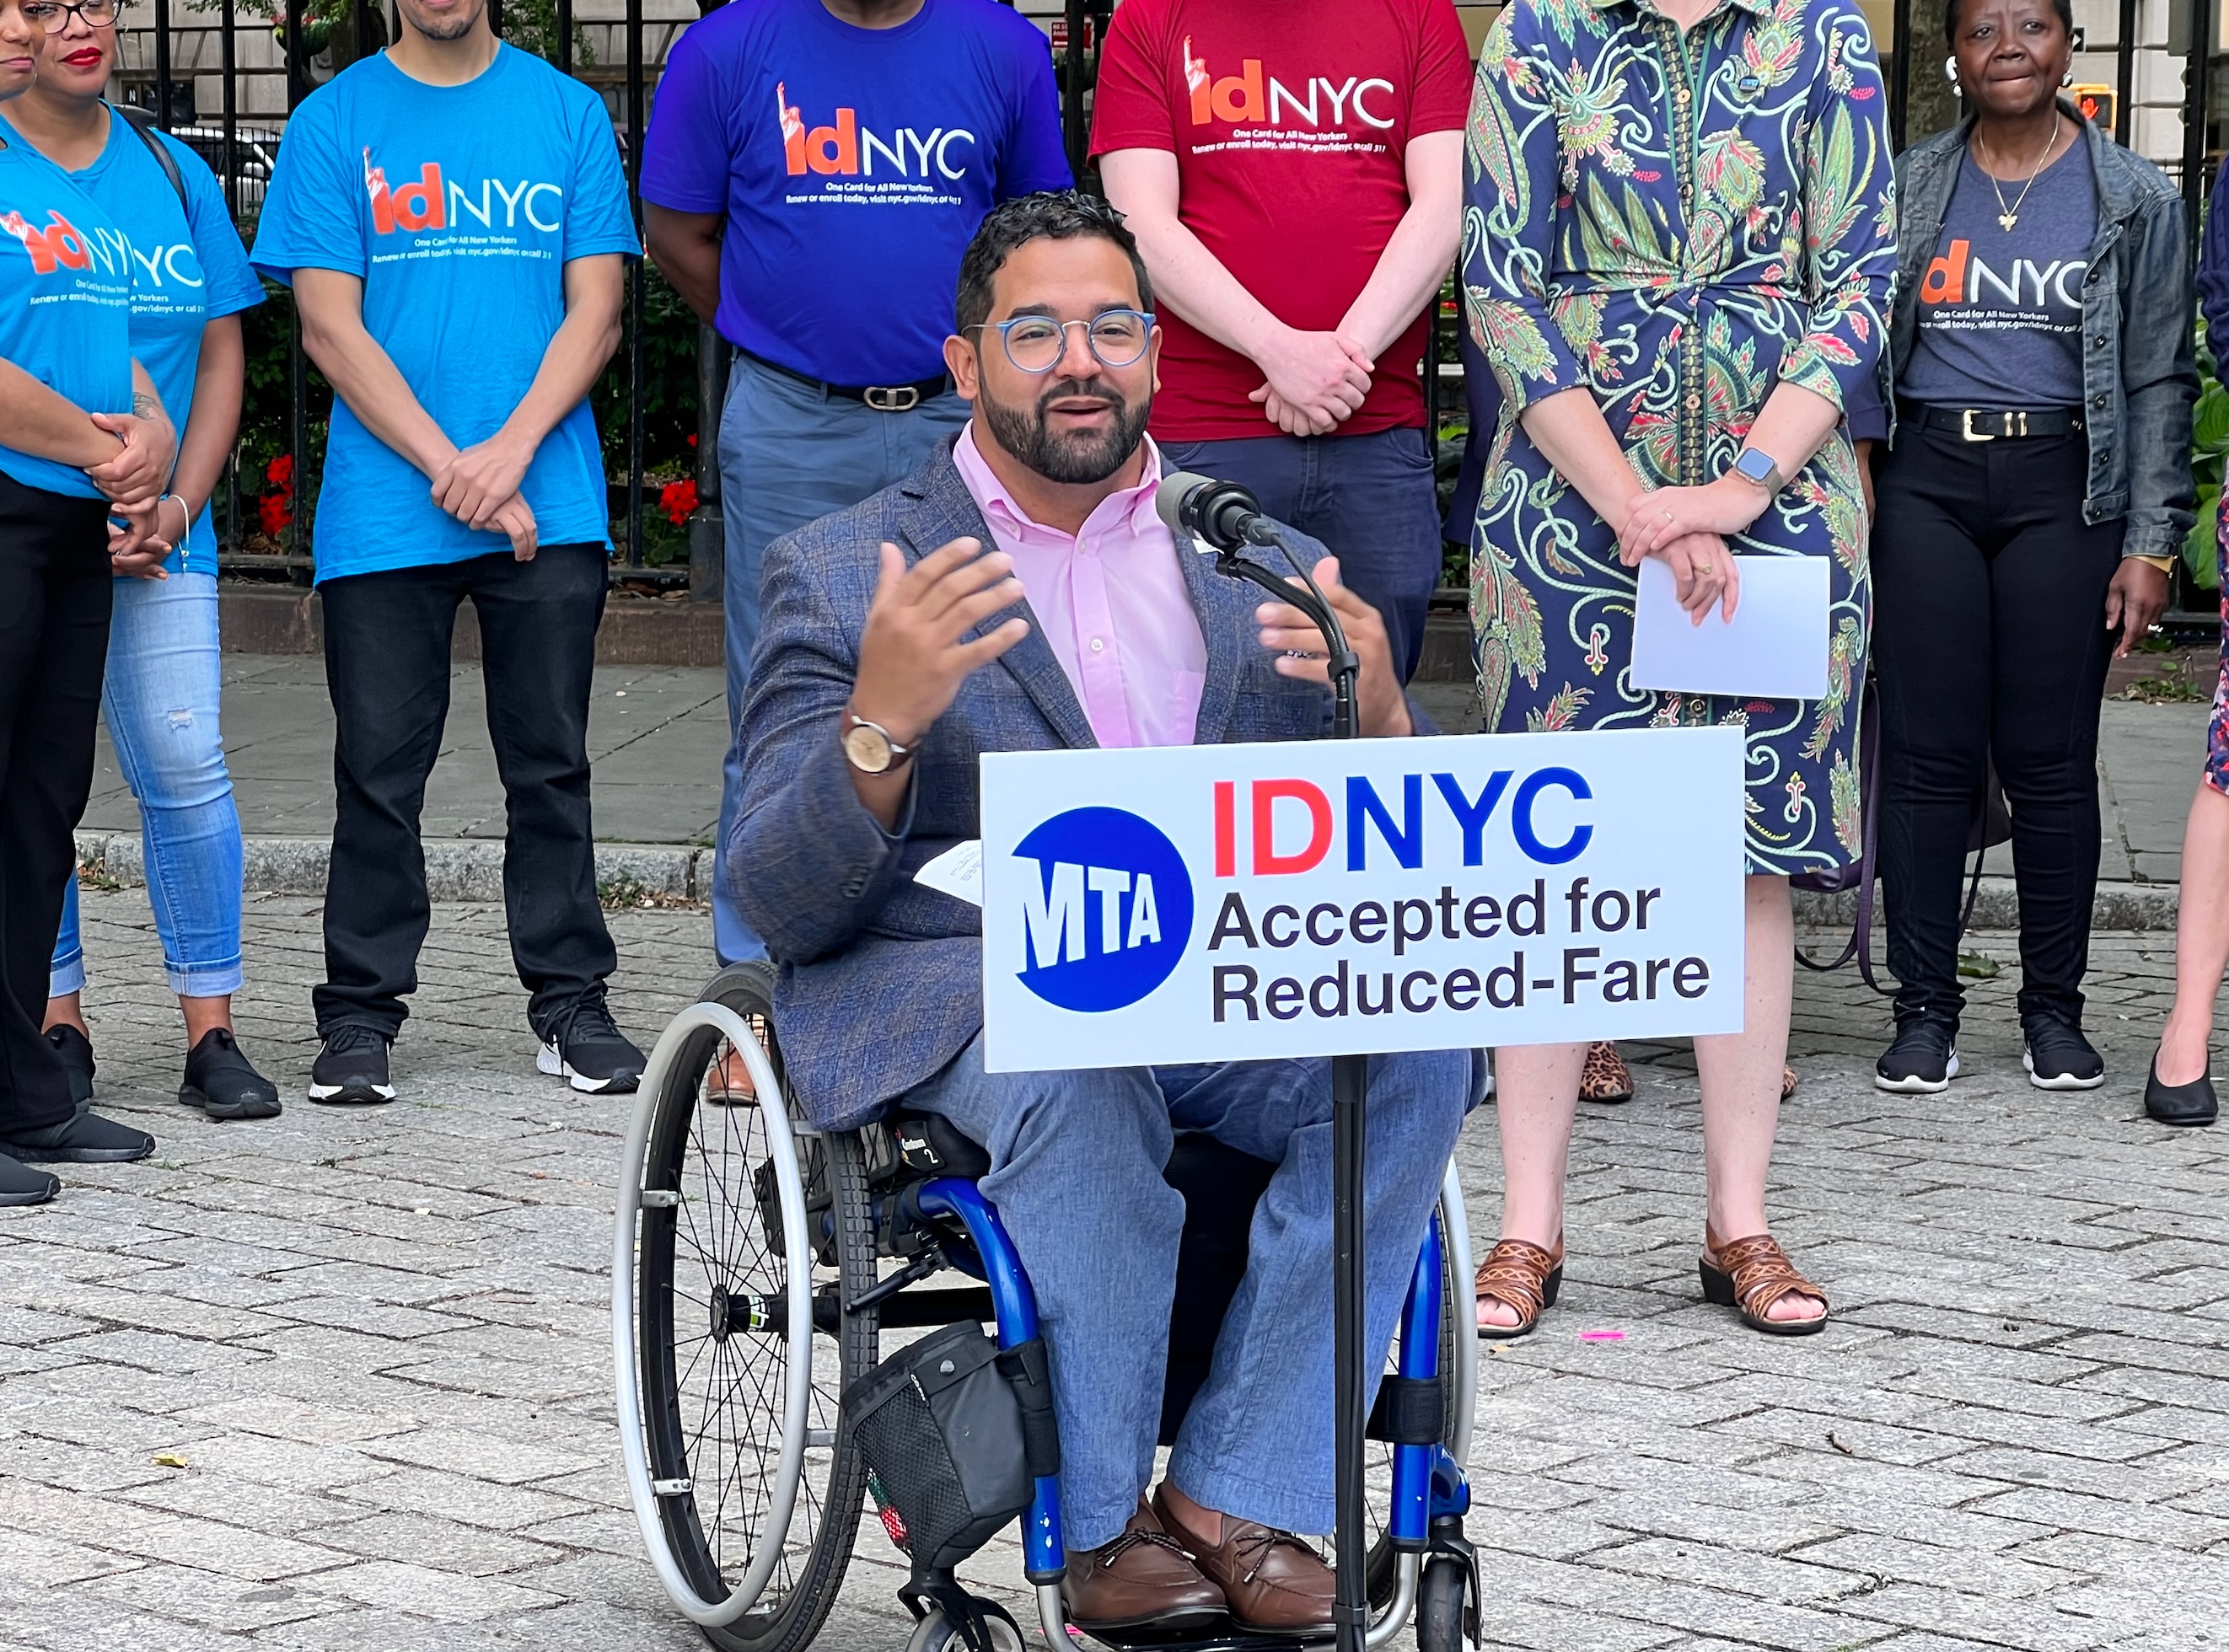 MTA Announces New Yorkers Can Apply for Reduced Fares With IDNYC